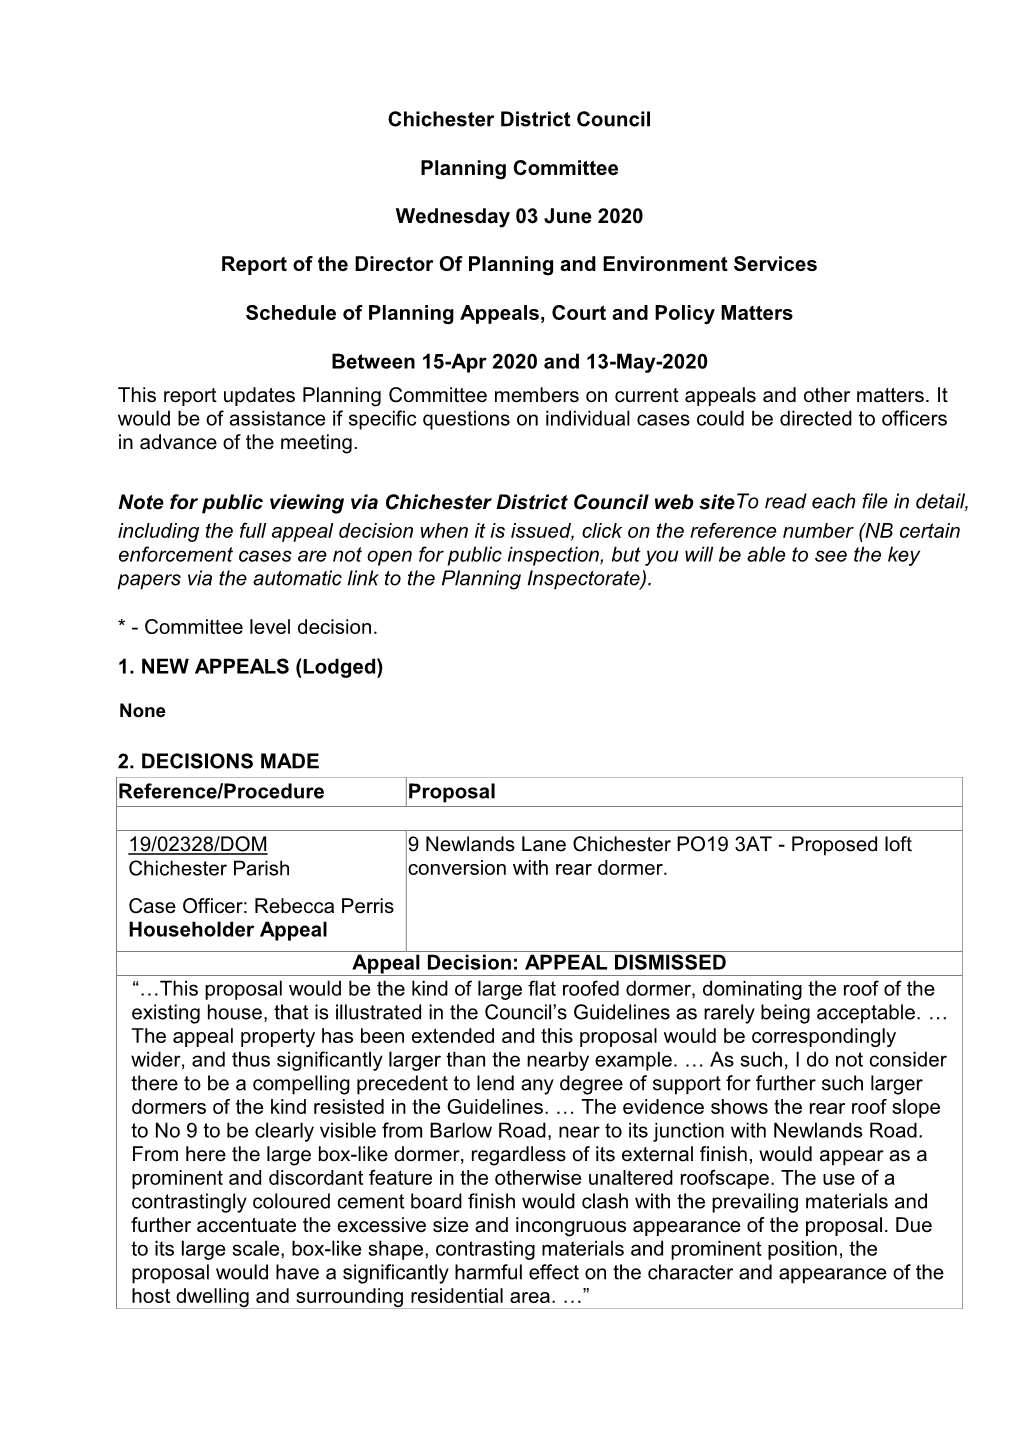 Chichester District Council Schedule of Planning Appeals, Court And